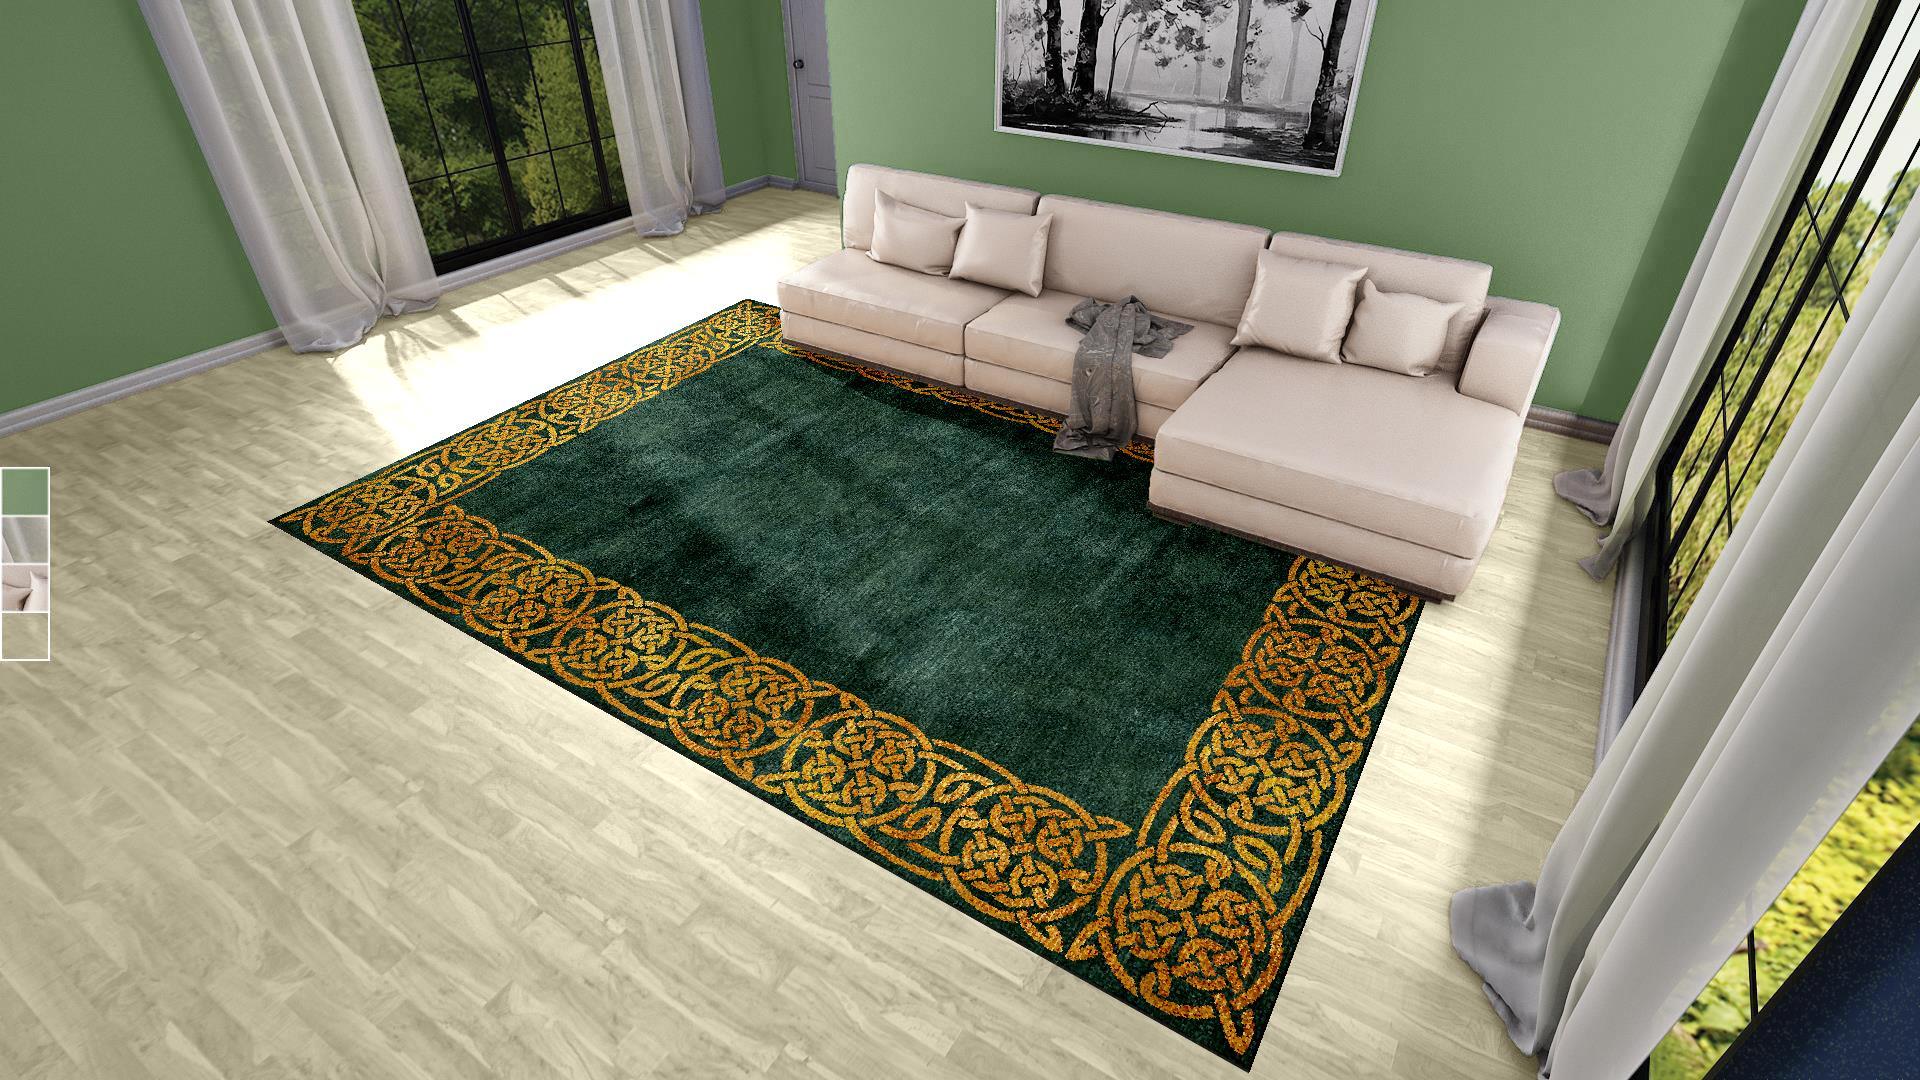 A beautiful new and made to order Hollywood Regency or Art Deco carpet, hand knotted using finest Chinese mulberry silk and Tibetan Highland Wool. The design features typical elements of that periods.
Construction
This artwork has a pile made of